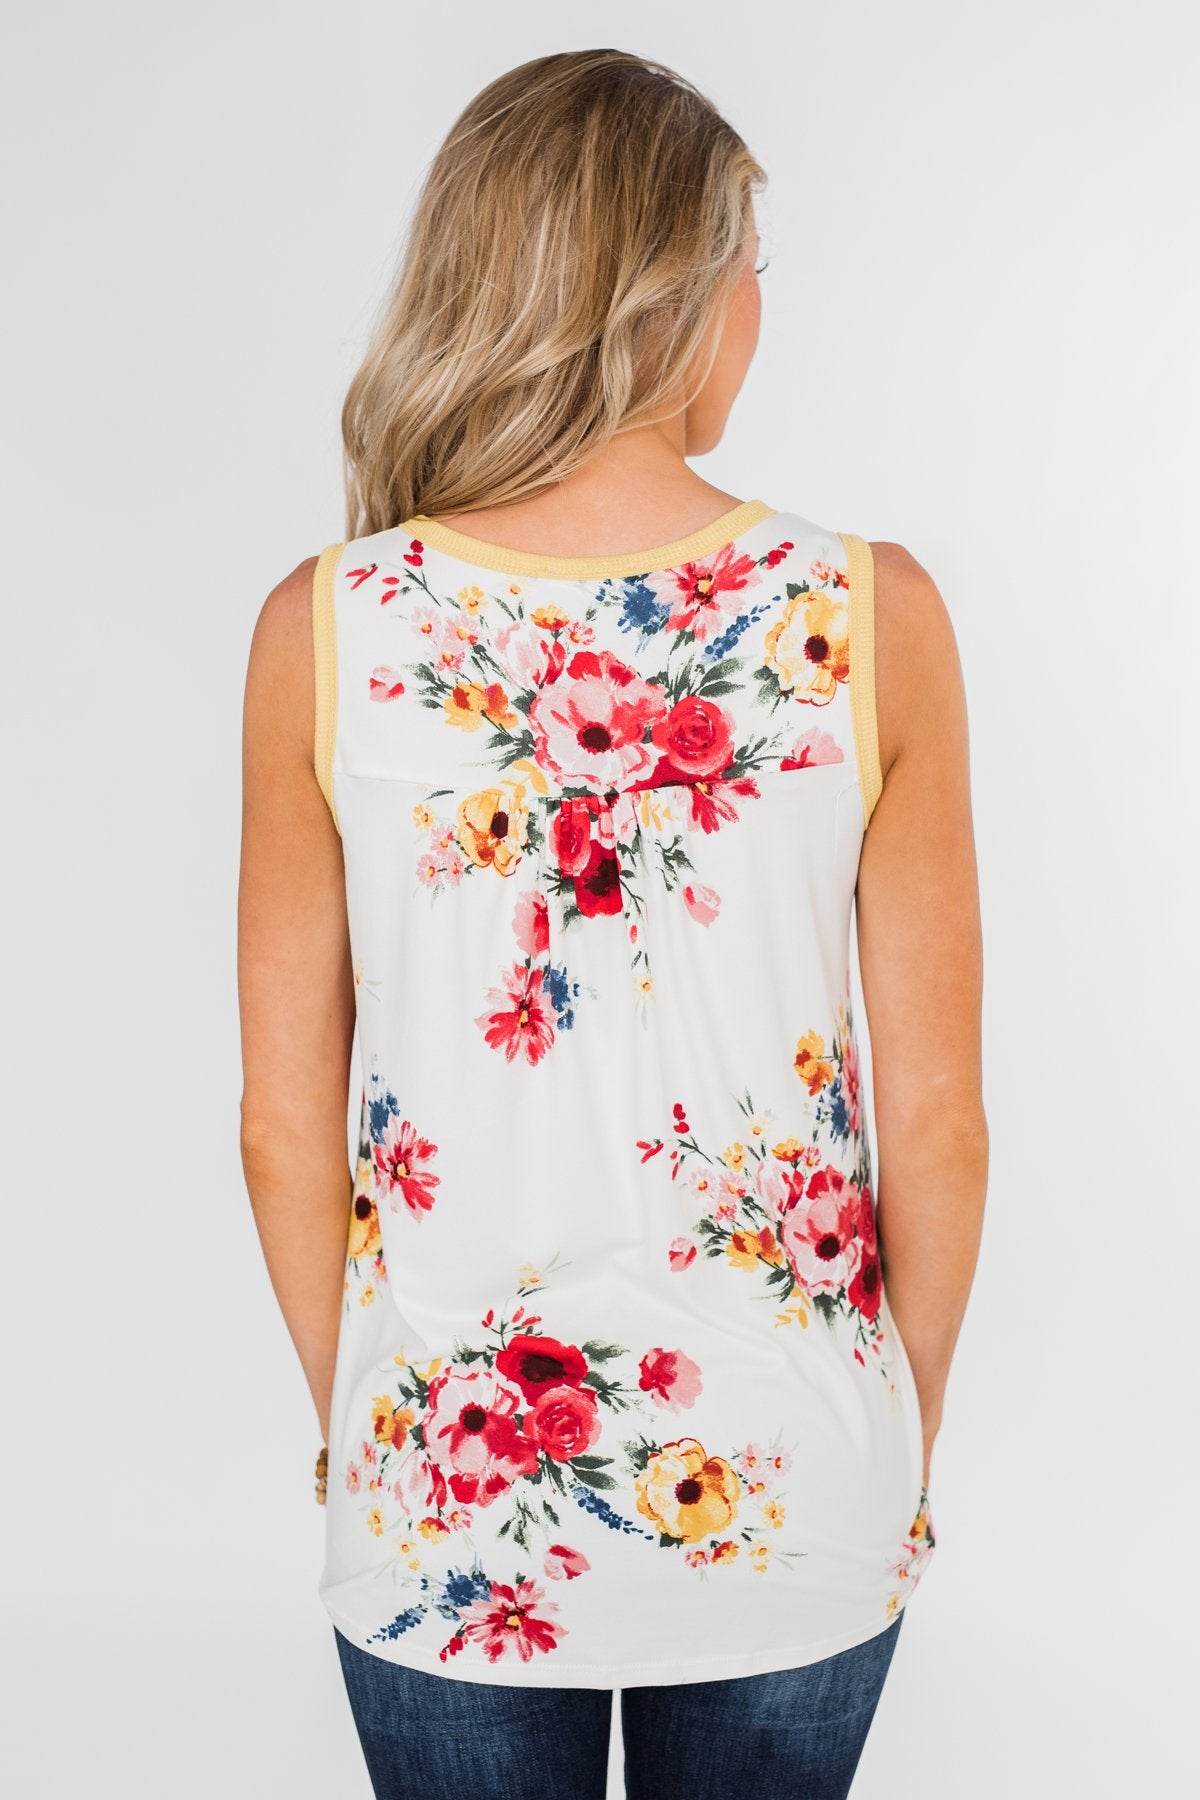 The Life I'm Living Floral Tank Top- Yellow